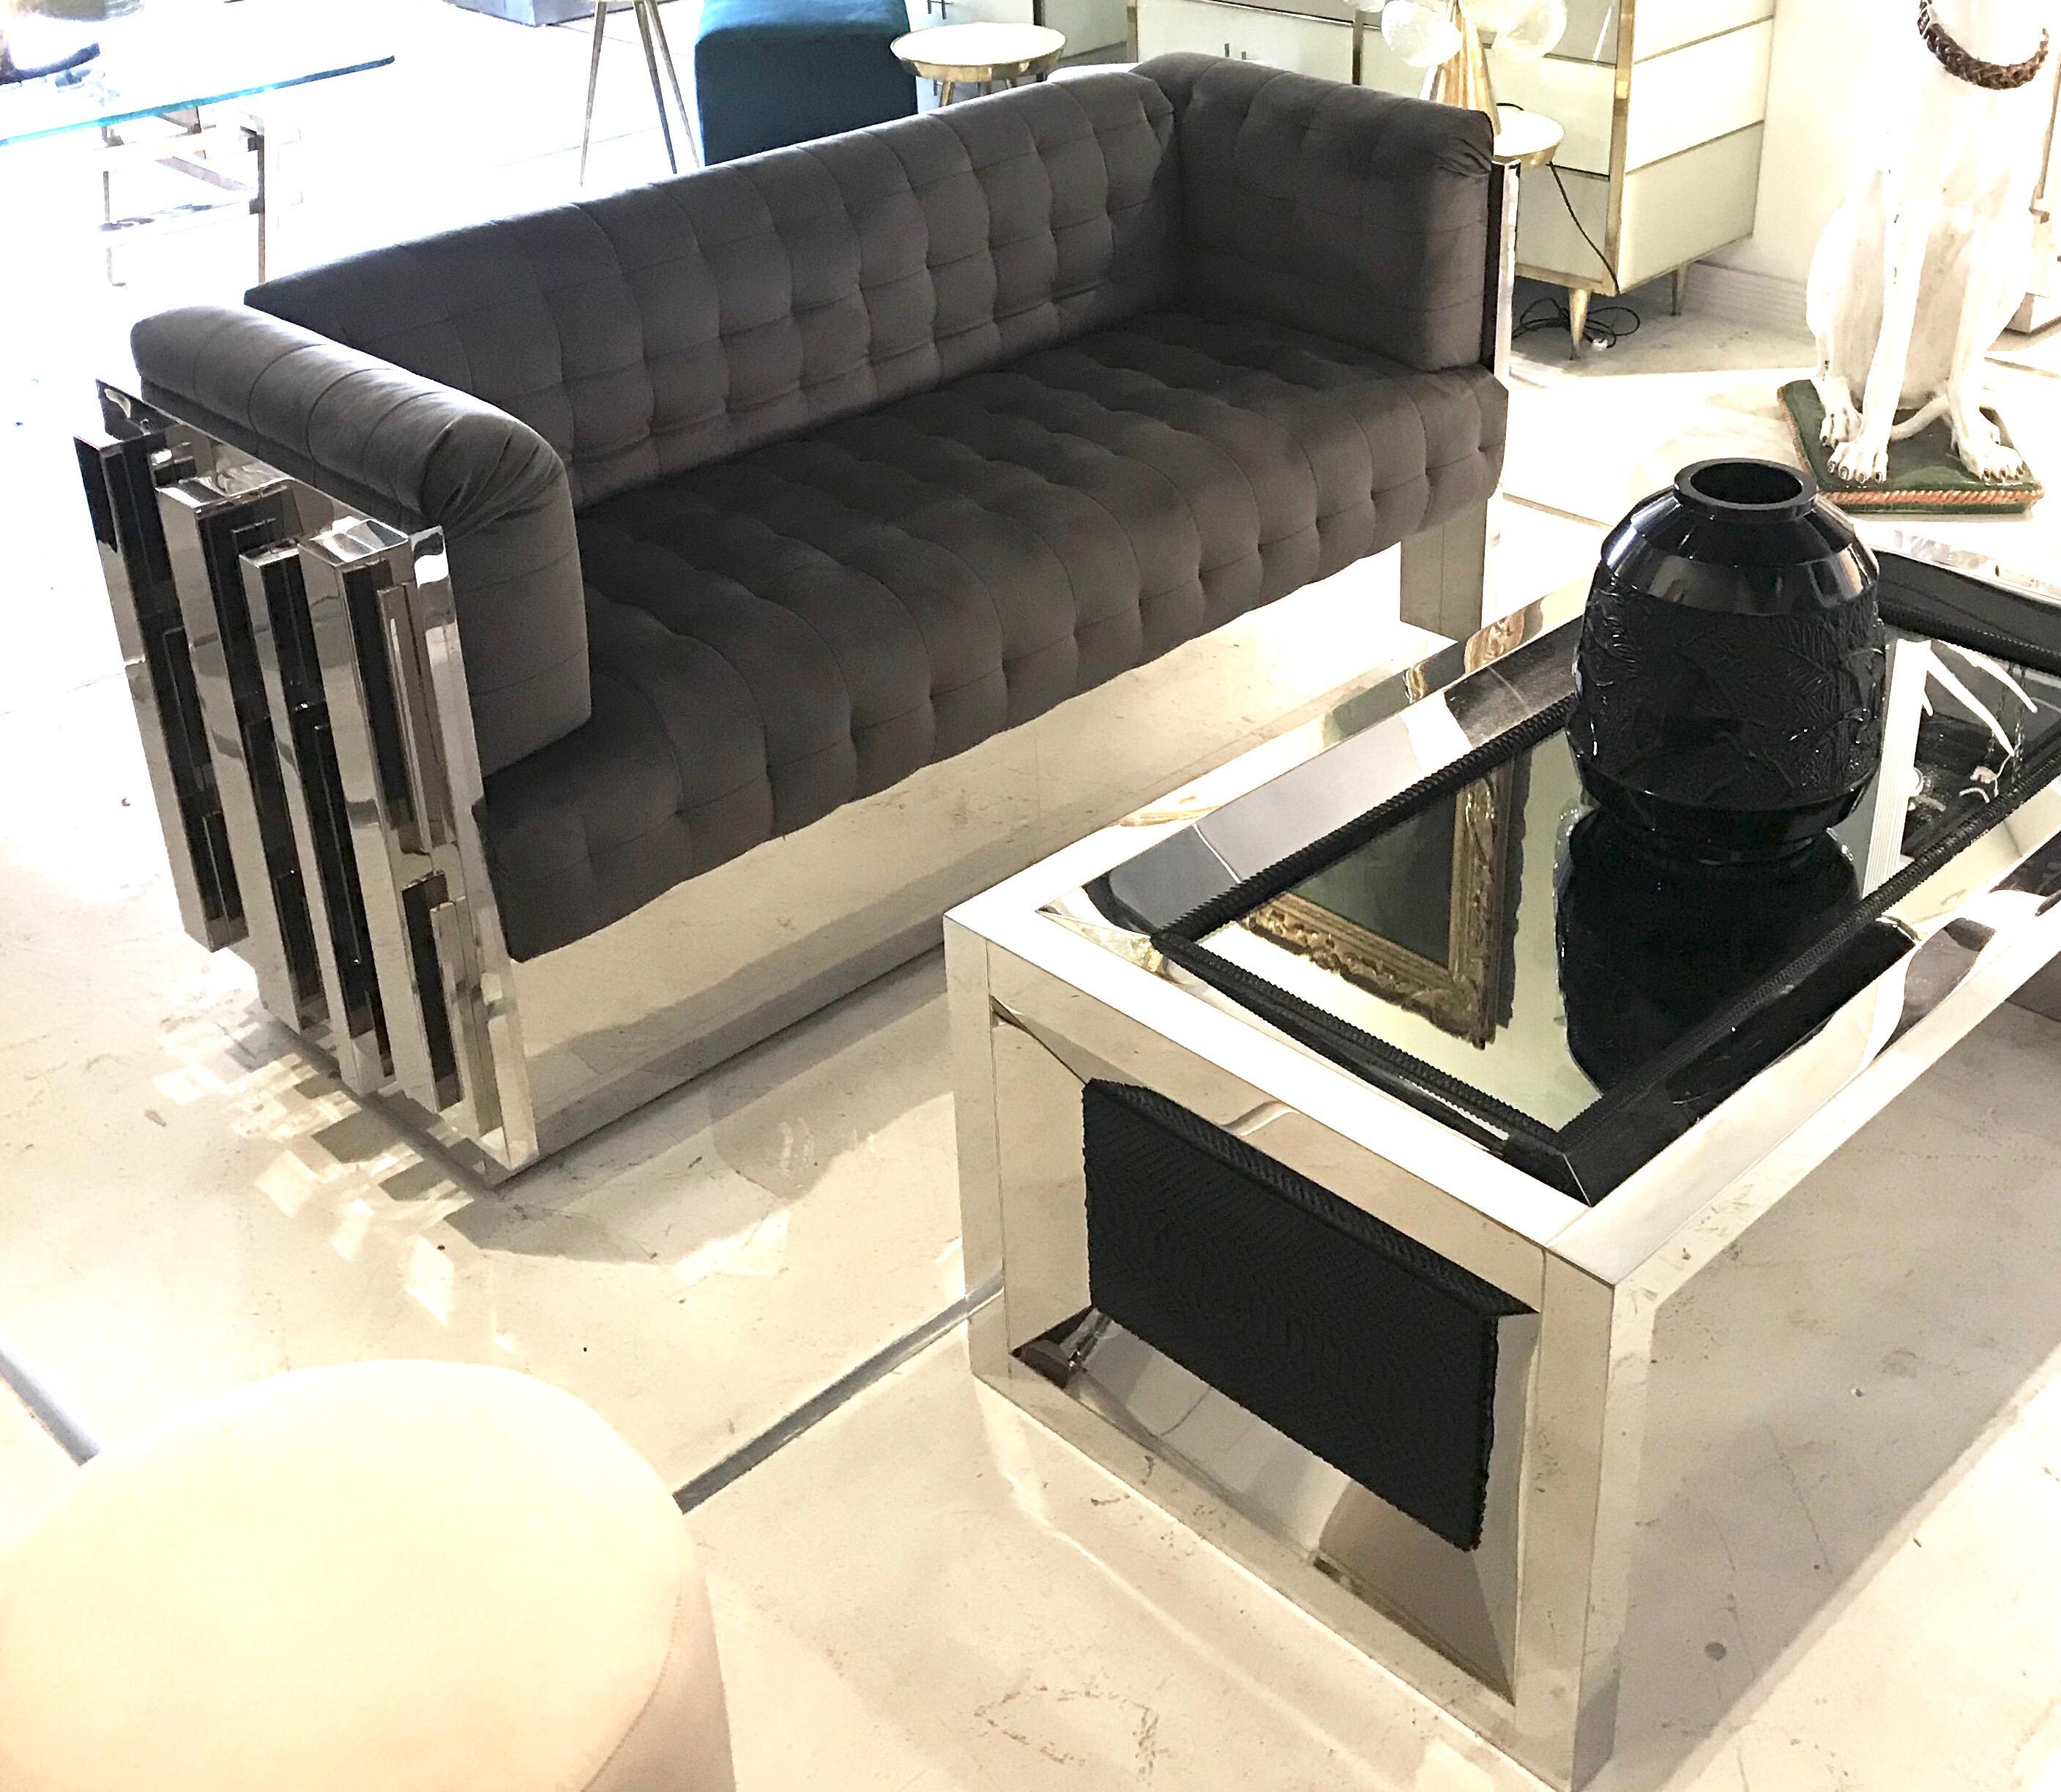 Contemporary Custom Made Mirror Polished Stainless Steel Sofa For Sale 9